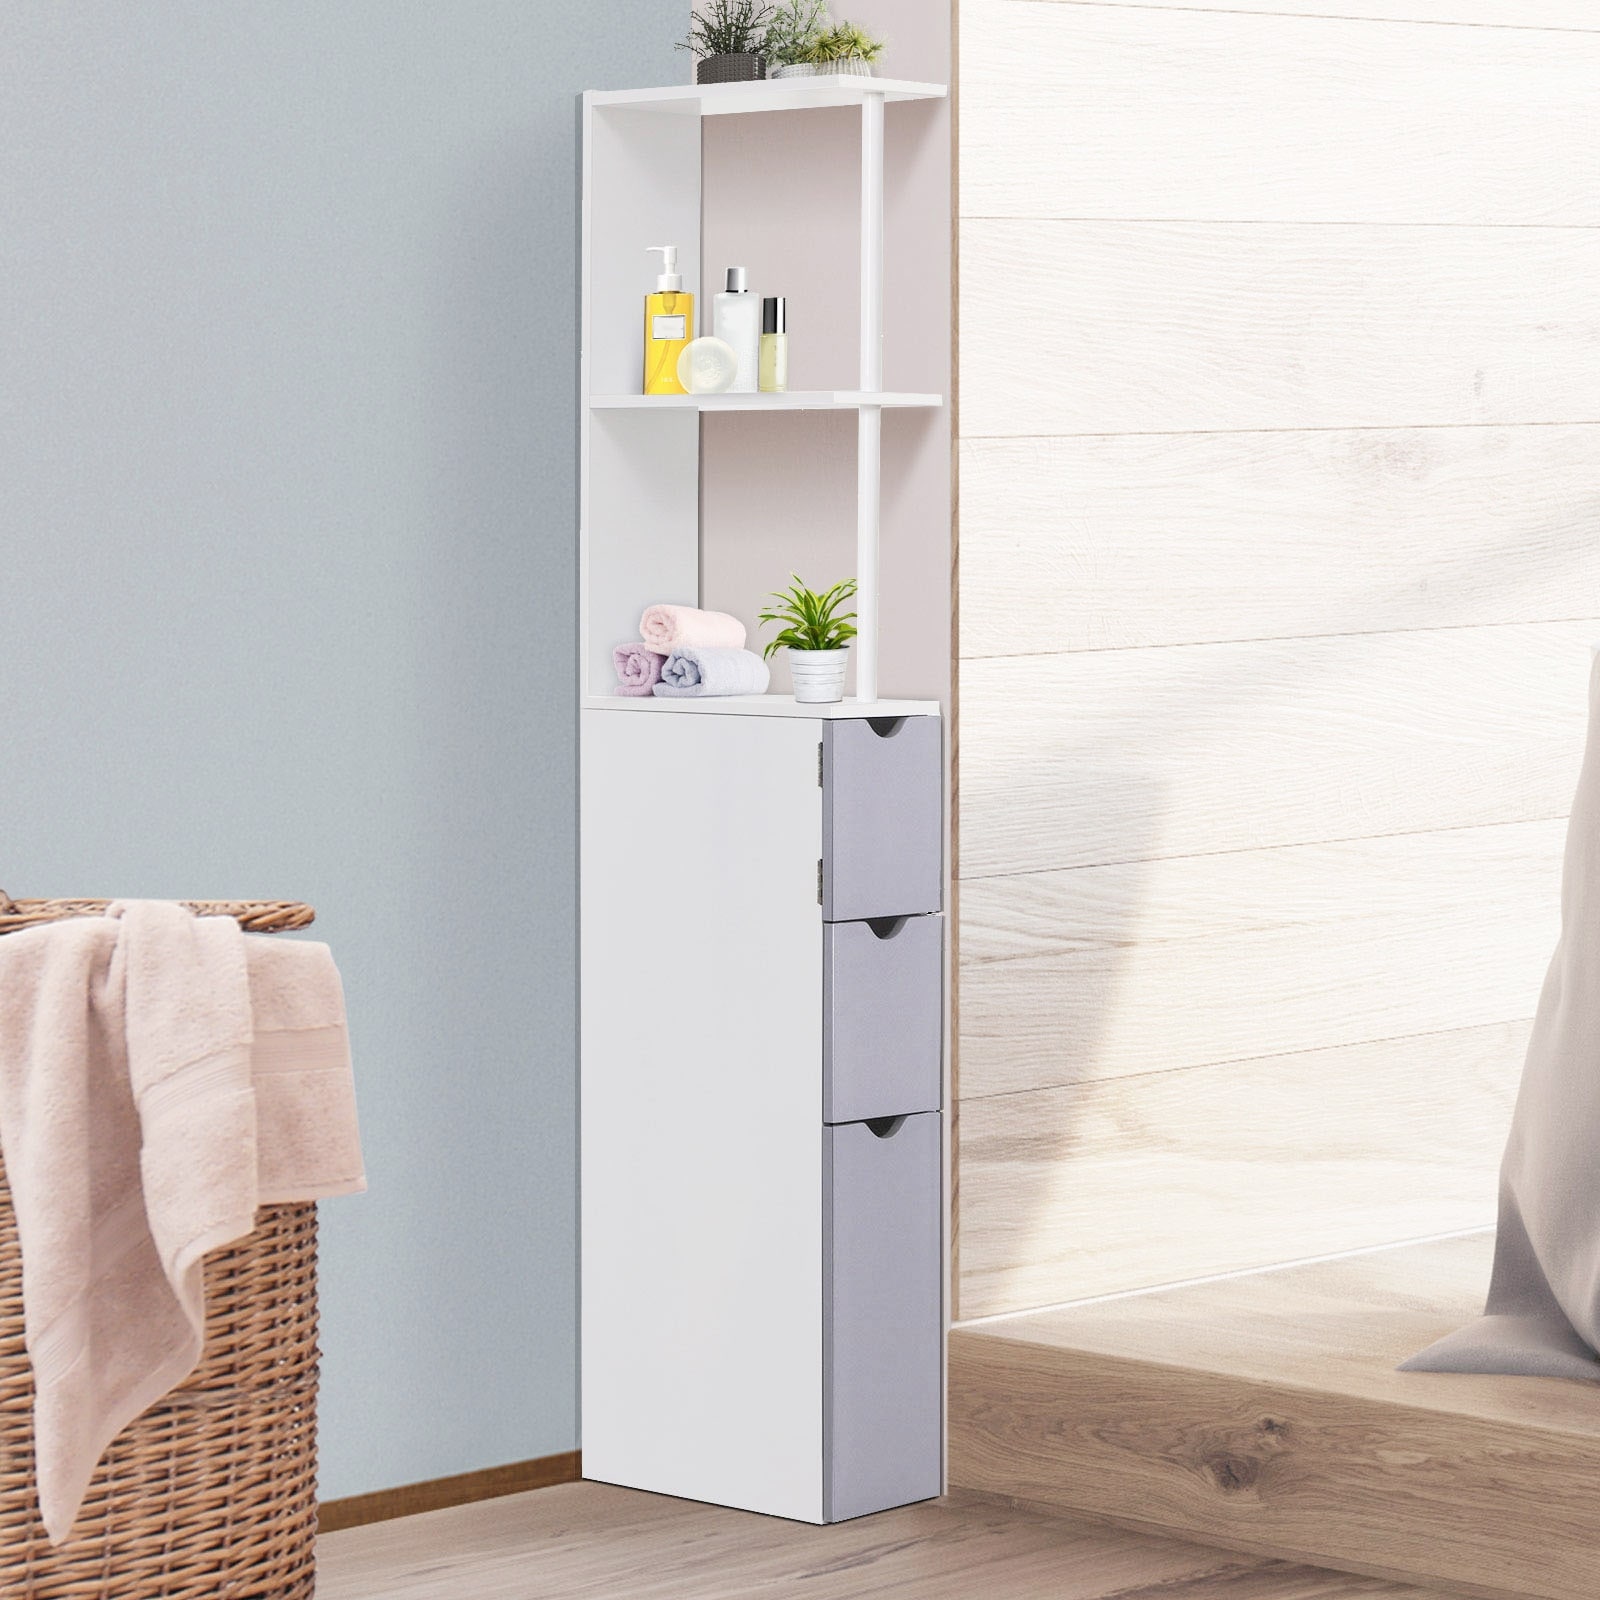 https://ak1.ostkcdn.com/images/products/is/images/direct/bf419a1e41eb086a4bb5cdfe9f81d8efa0dc5916/Bathroom-Tower-Storage-Cabinet.jpg